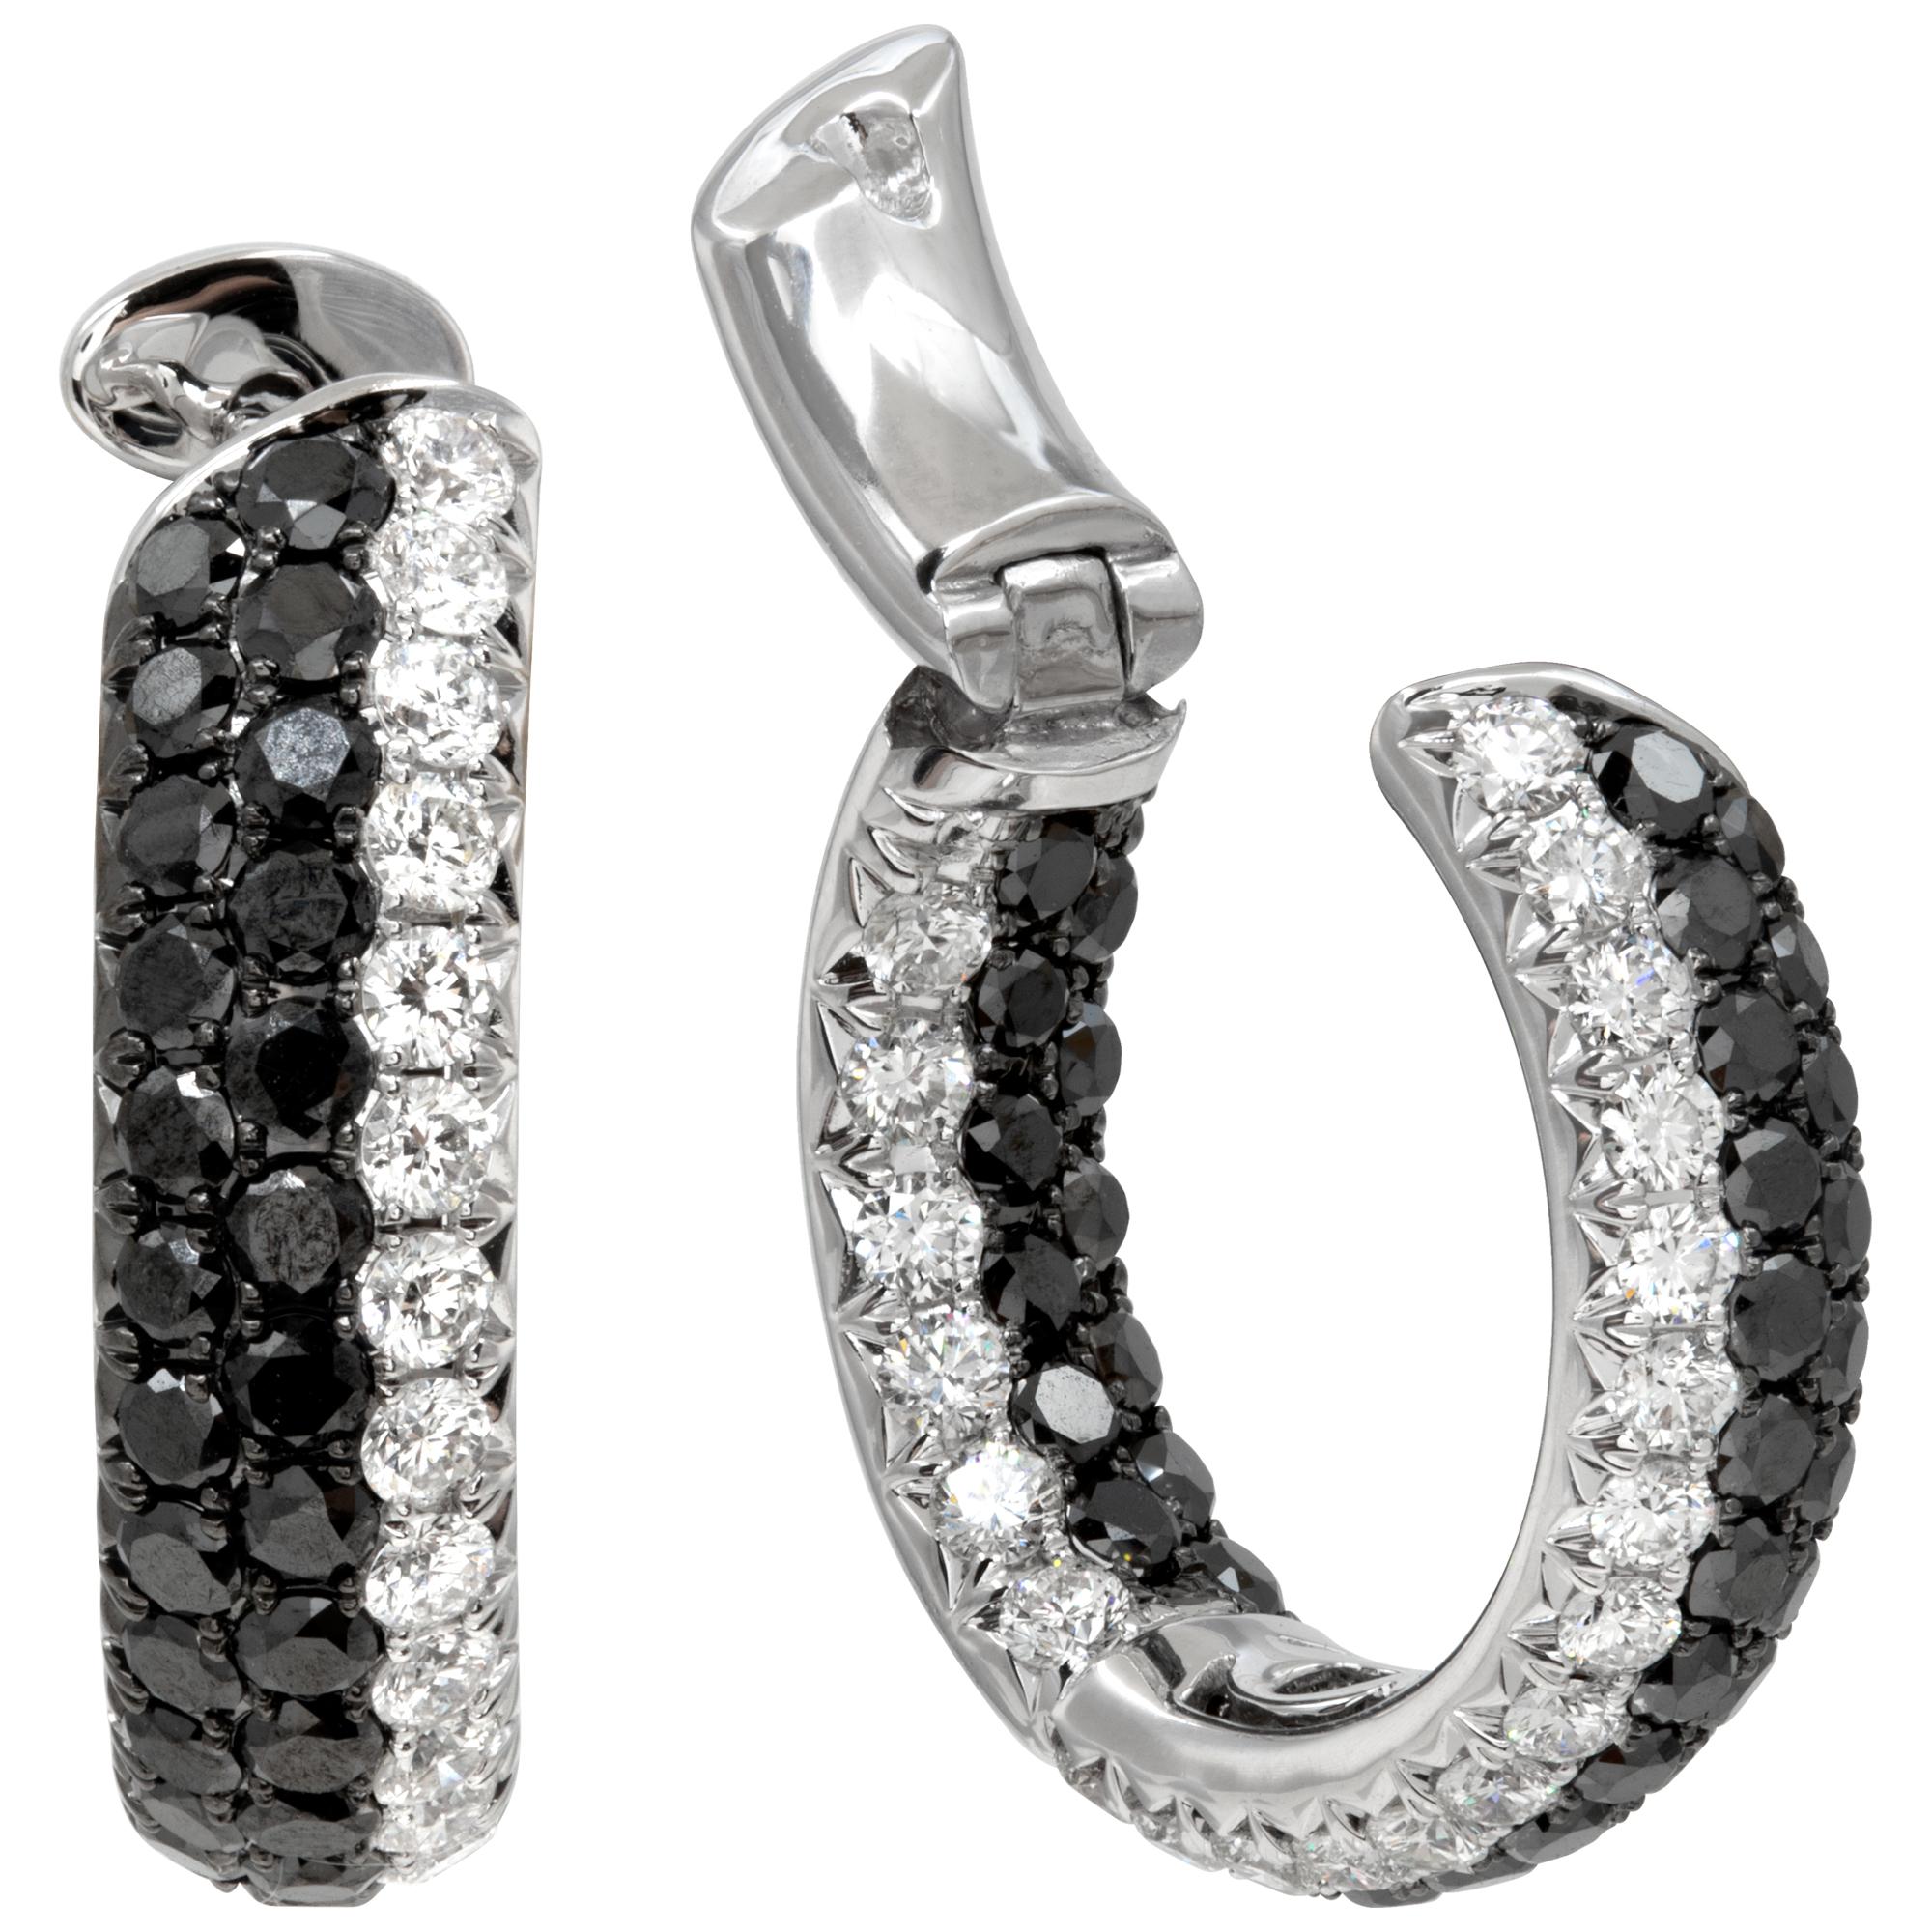 Black & white diamond hoop earrings in 18k white gold with approximately 2.30 carats in white diamonds and 1.10 carats in black diamonds. 7/8 inch diameter (21mm).